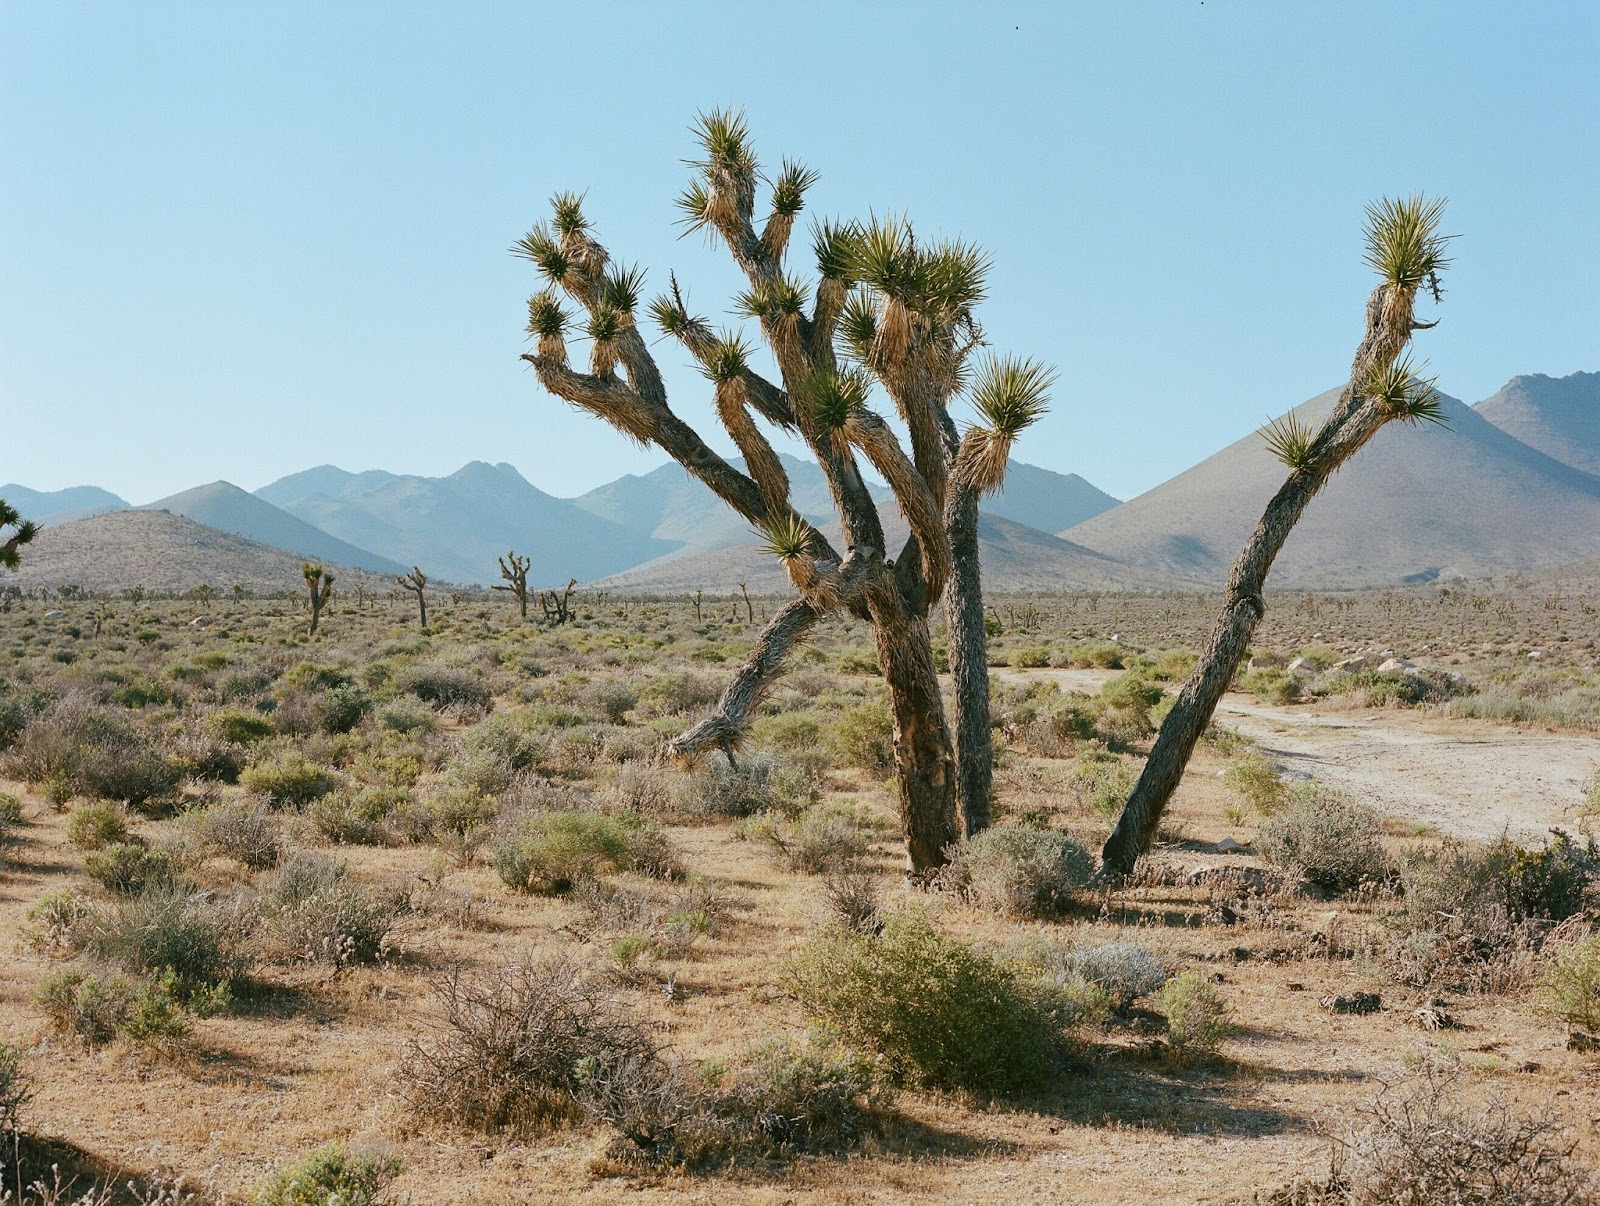 The convenient location of Joshua Tree to Coachella is why spring is the best time to visit Joshua Tree.
pictured: Joshua Tree